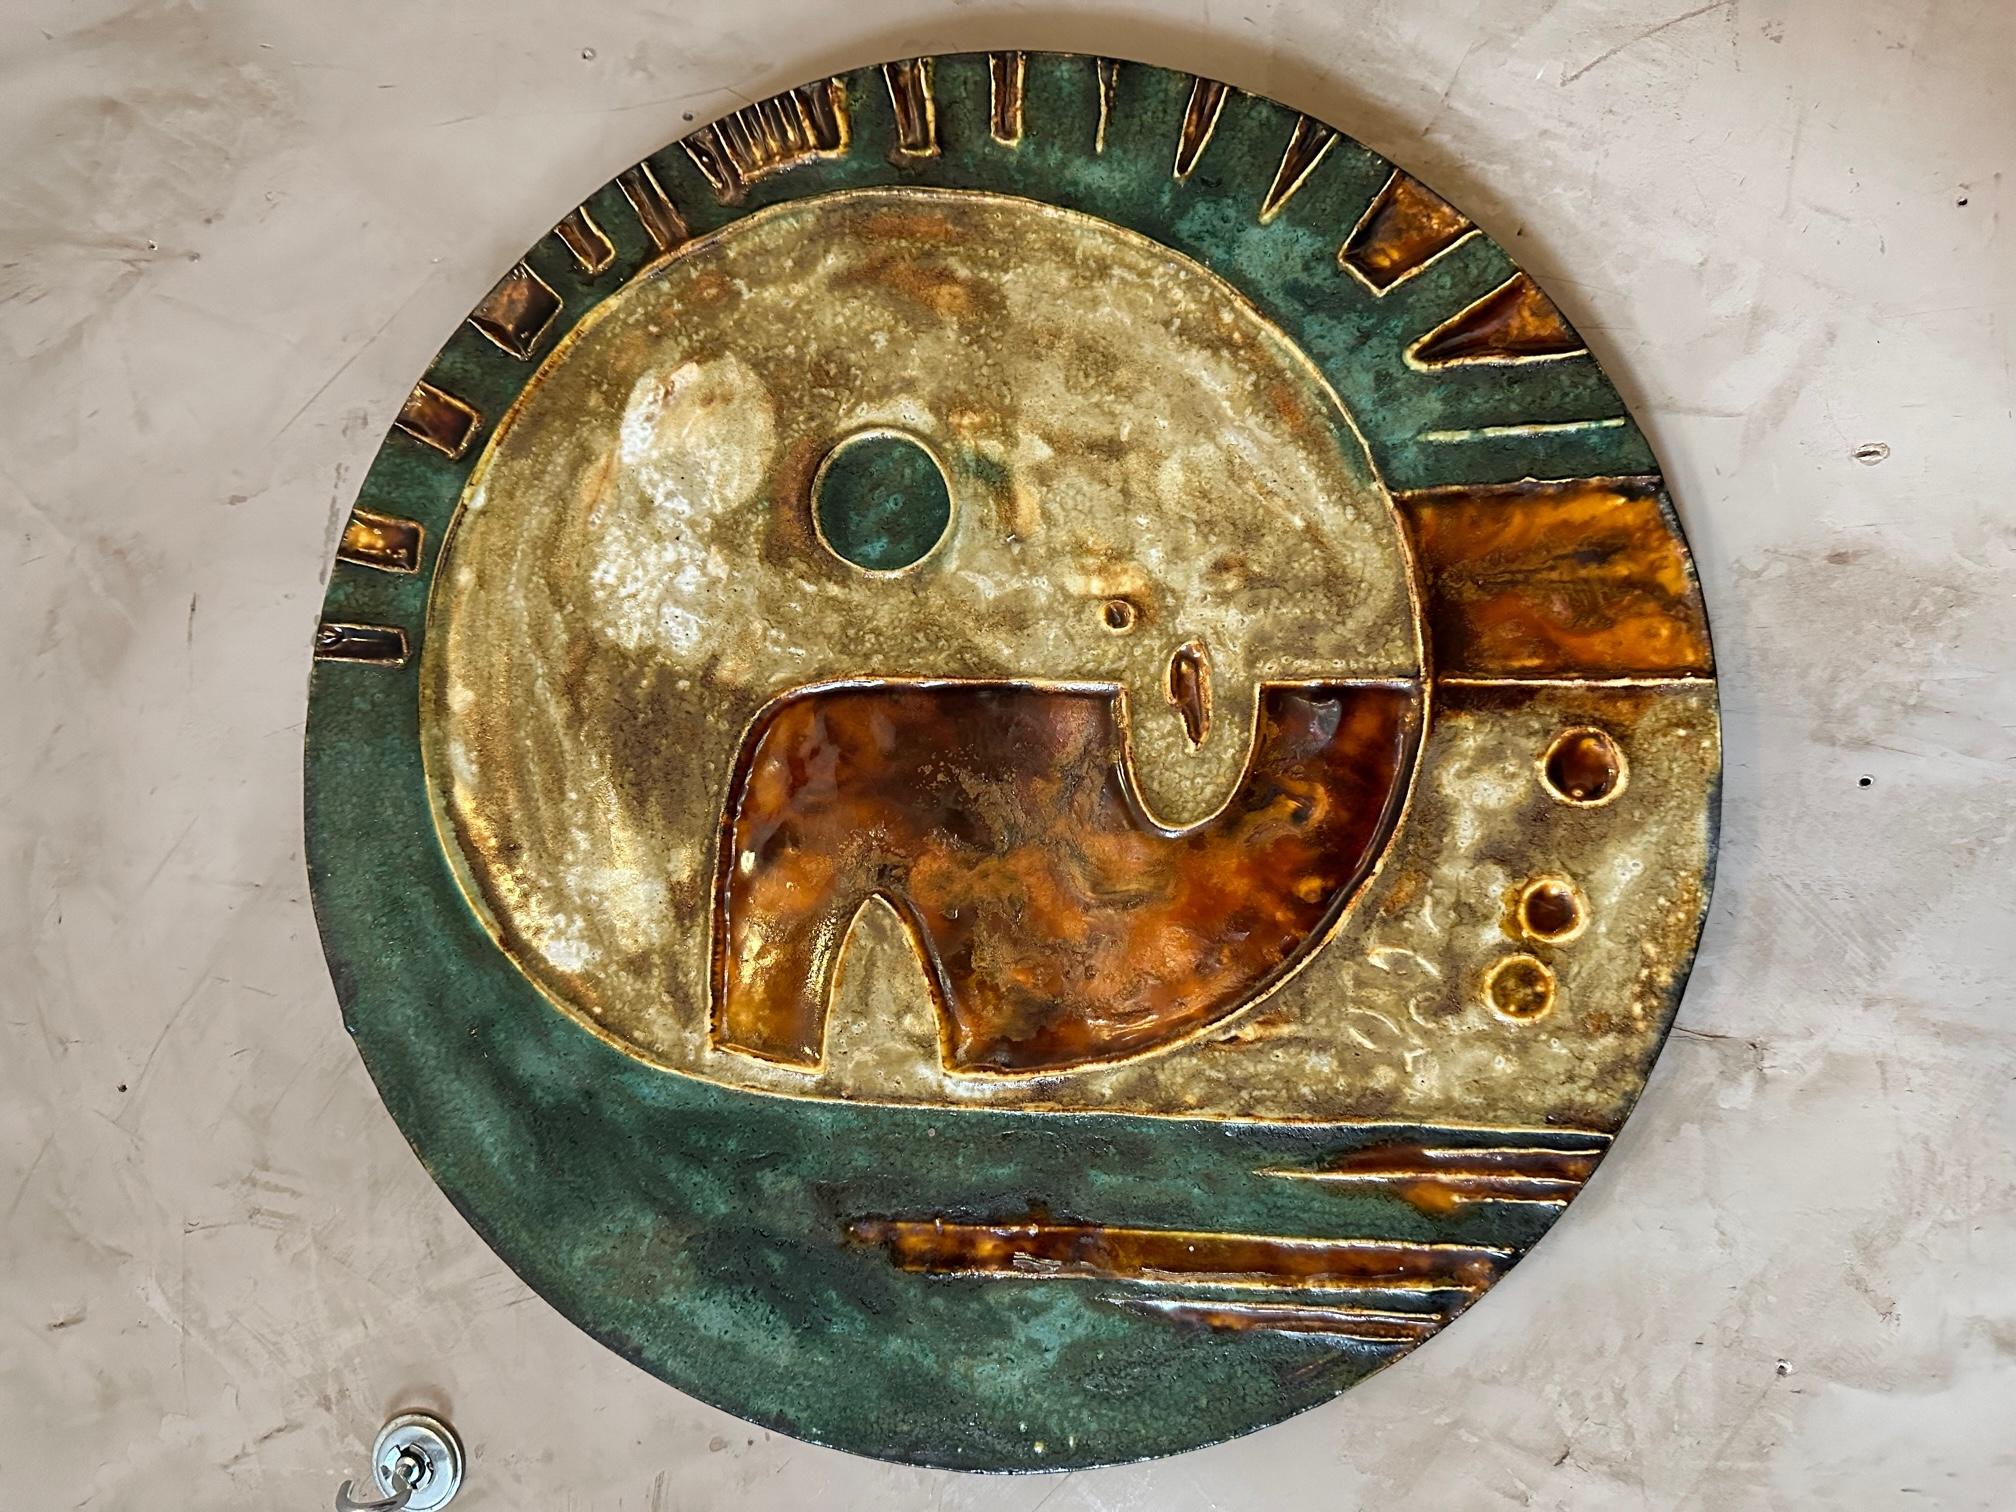 Very beautiful ceramic medallion from the 60s from the Helmut Schaffenacker workshop. Representing a face. Pretty colors.
Signature on the back. Very good quality and very good condition.